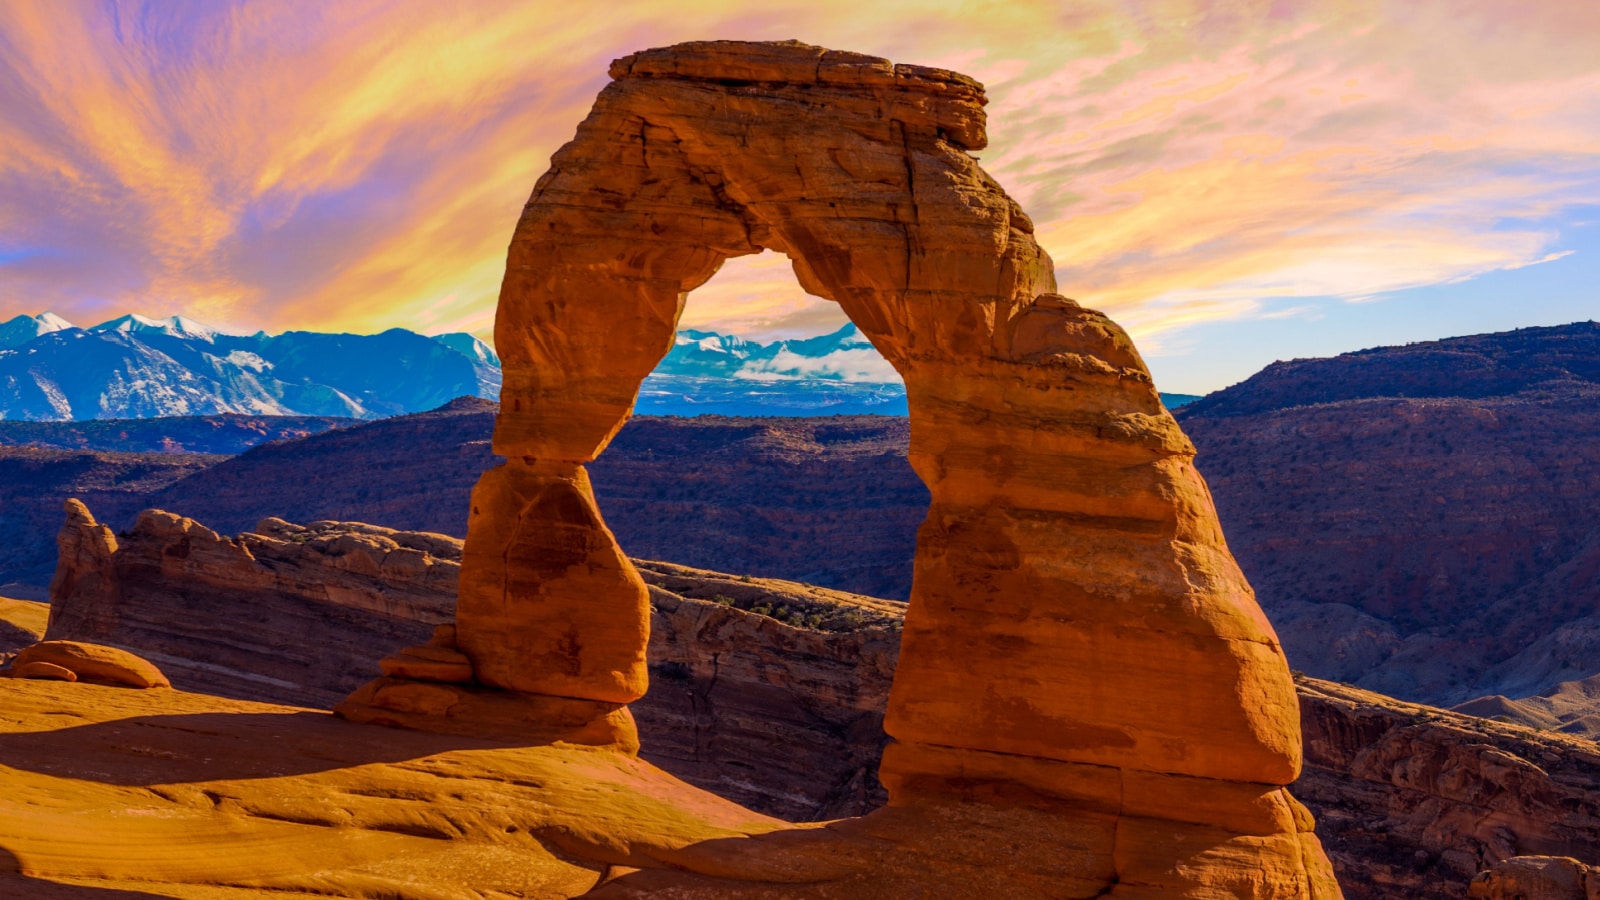 <p>In southeastern Utah, Arches National Park is a must-visit for its more than 2,000 natural stone arches, towers, and fins. It’s a landscape of wonders.</p>